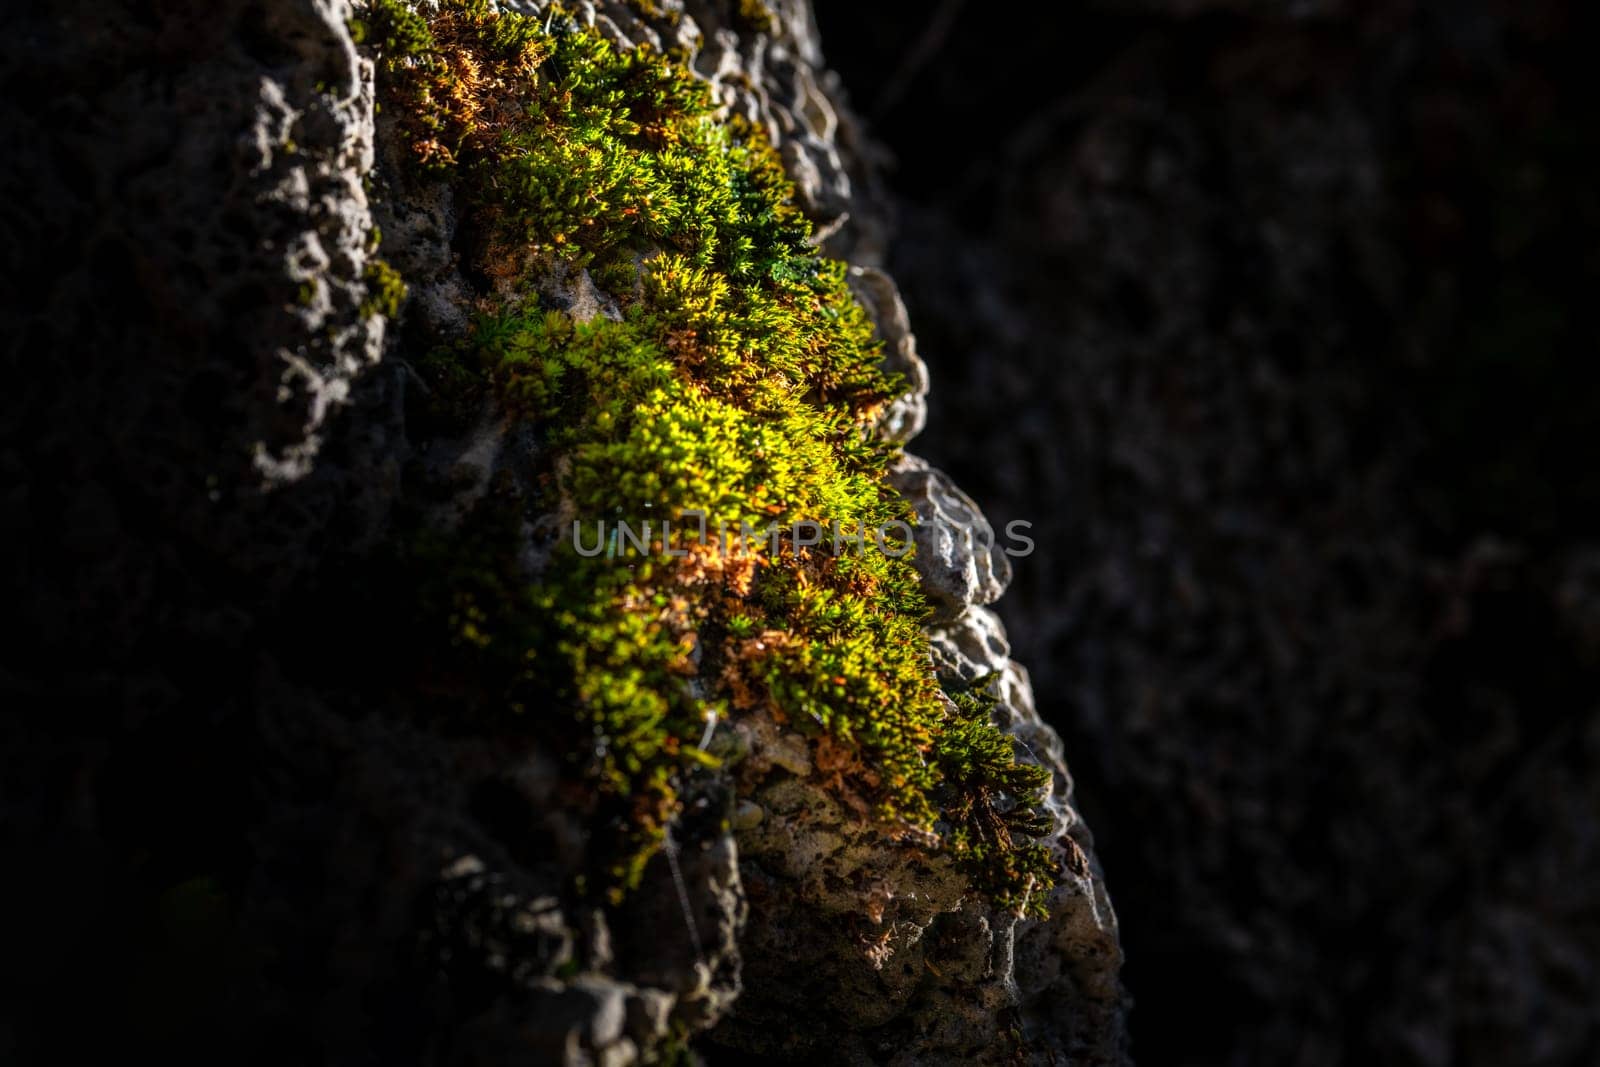 Moss on stone in damp forest. close-up and selective focus